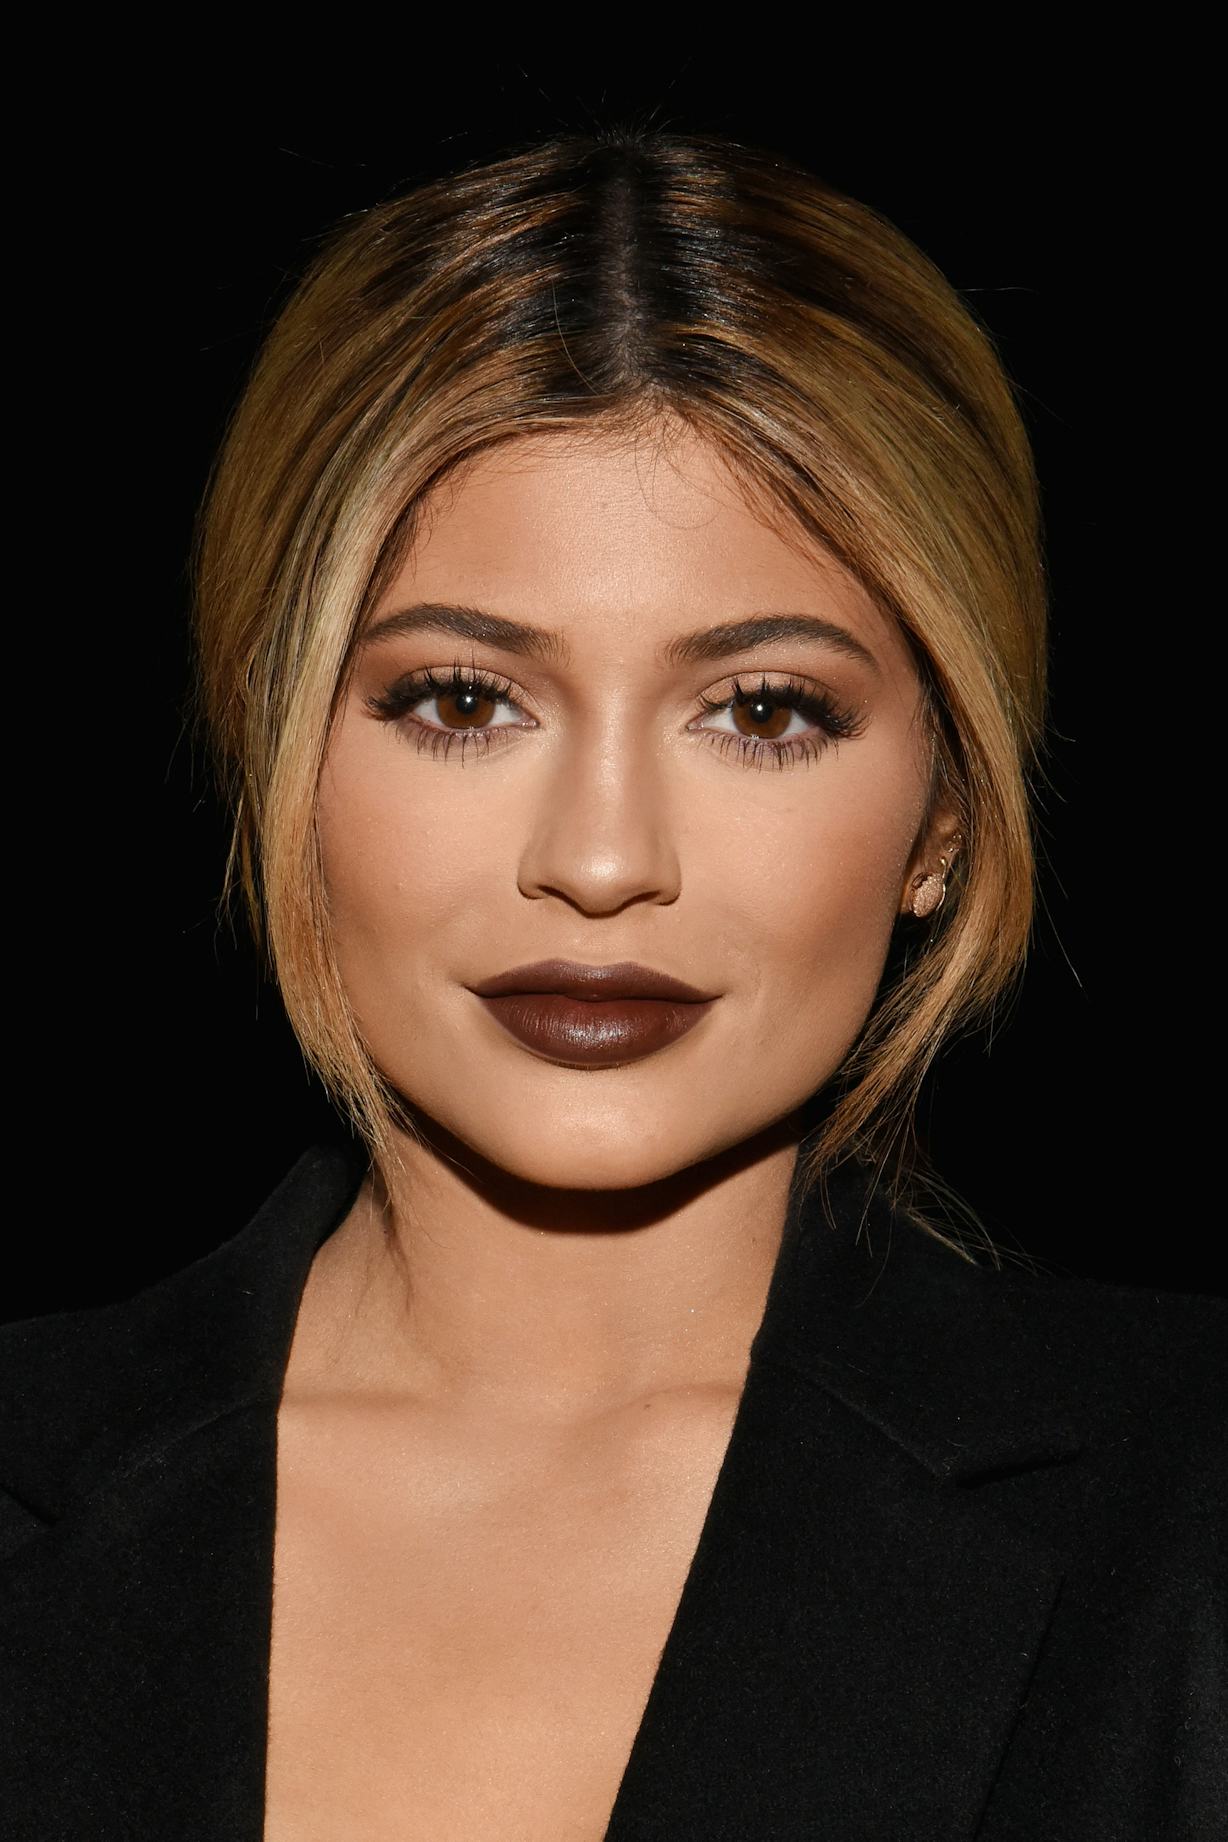 Kylie Jenner Has Short Hair Again With This New Blunt Bob Cut — PHOTO